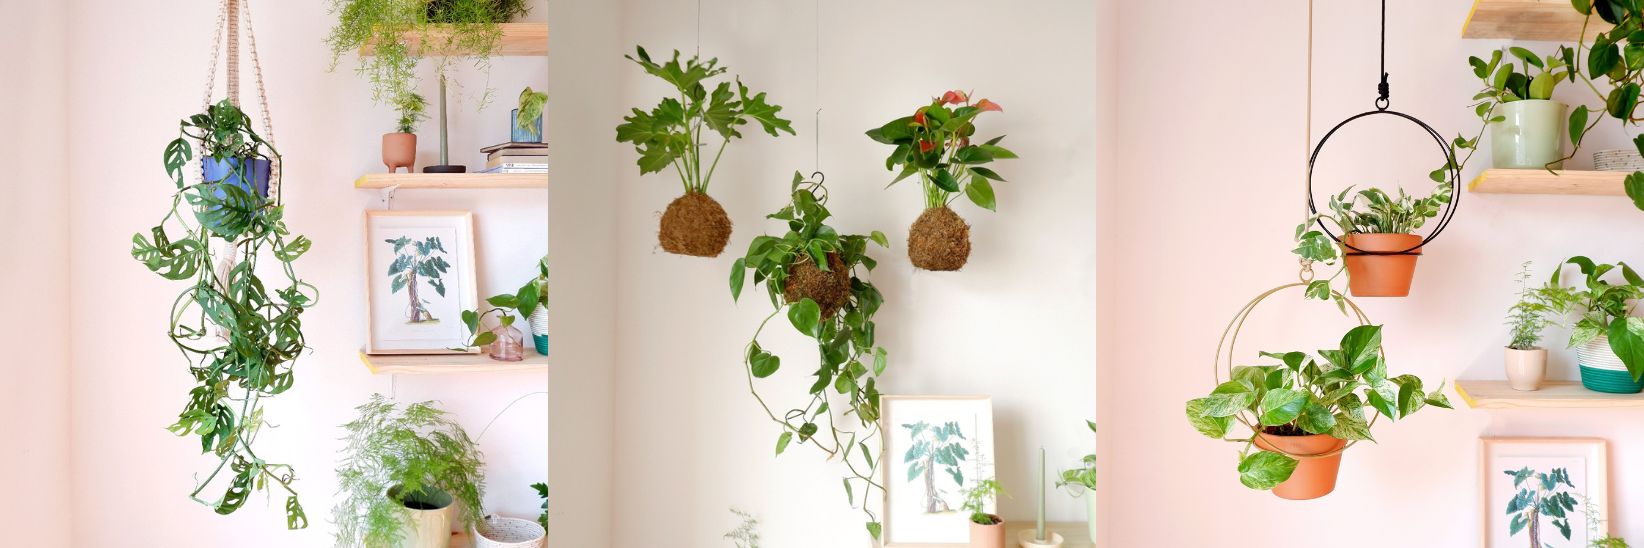 styling hanging plants